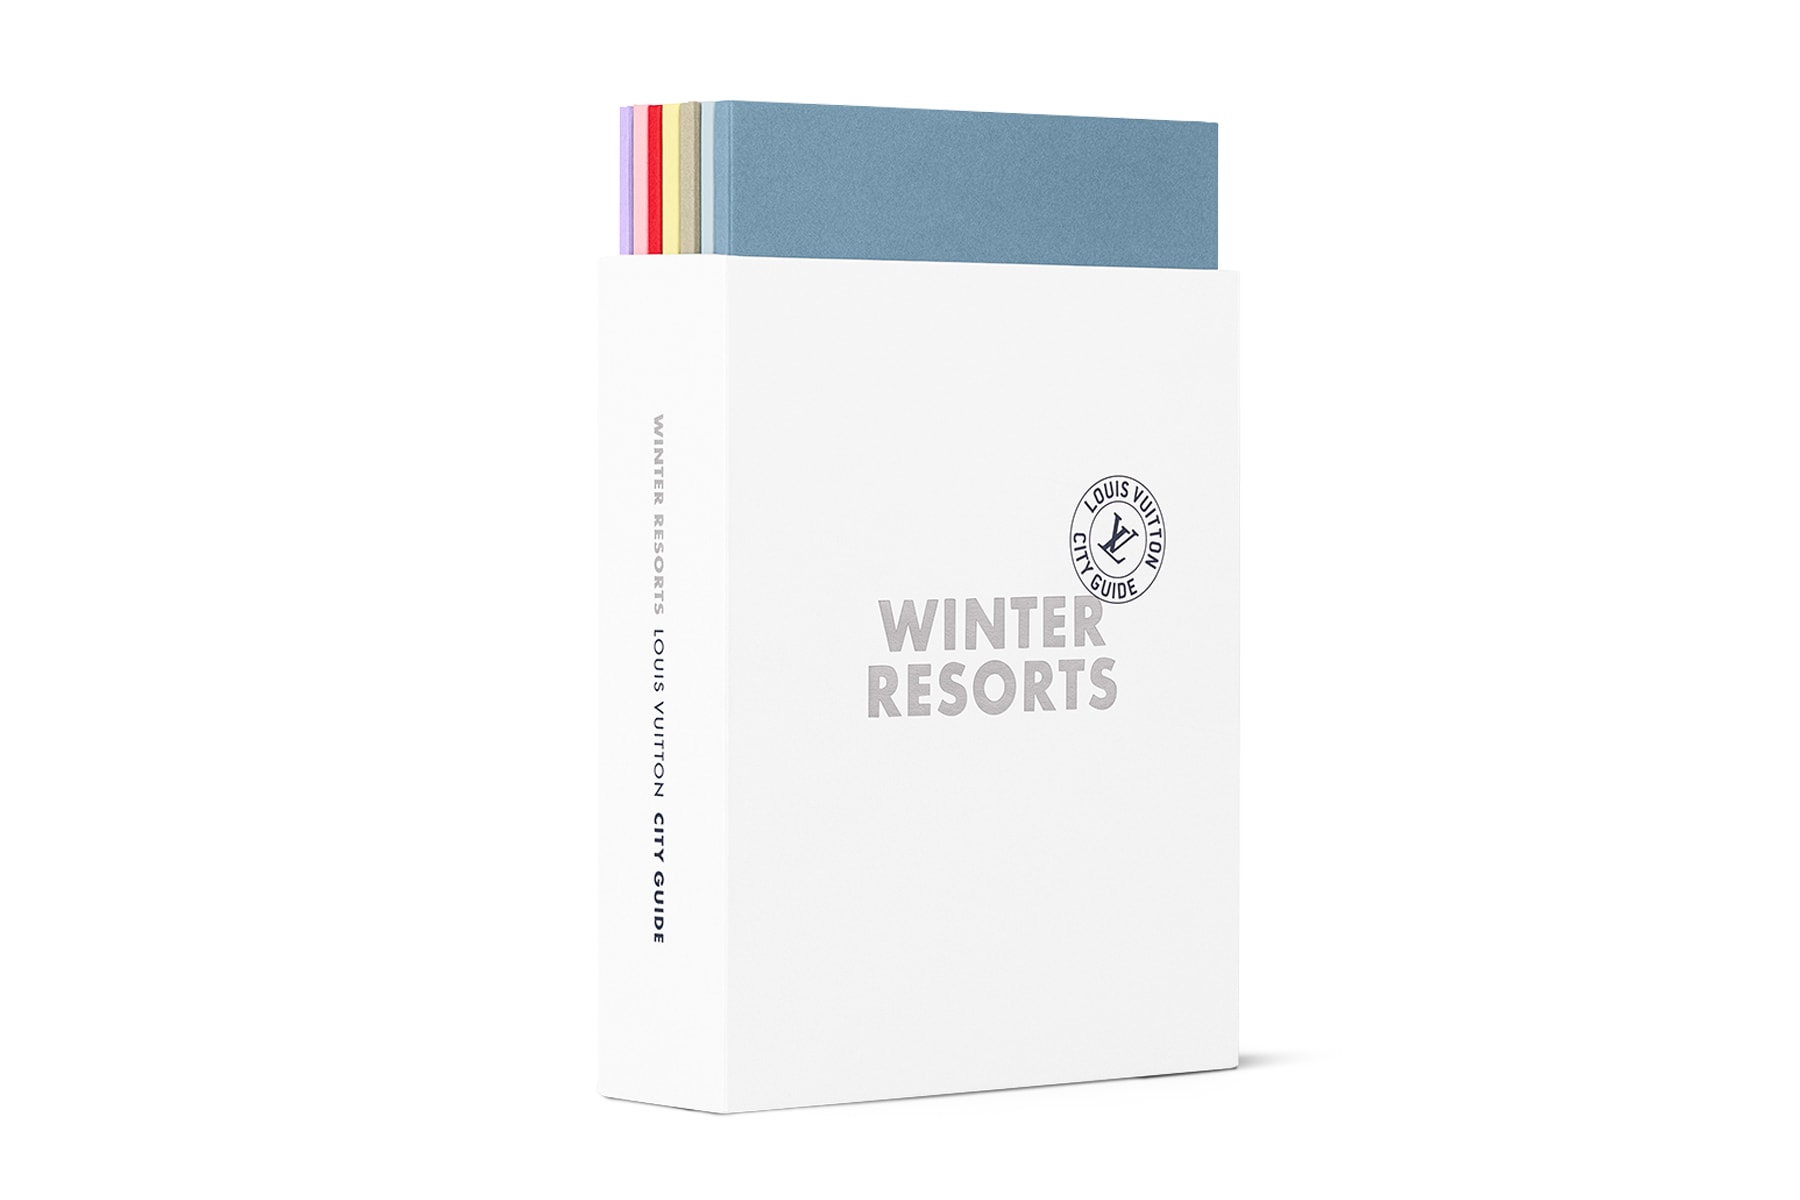 Louis Vuitton 正式推出全新城市指南書籍套裝《Winter Resorts City Guide Box Set》